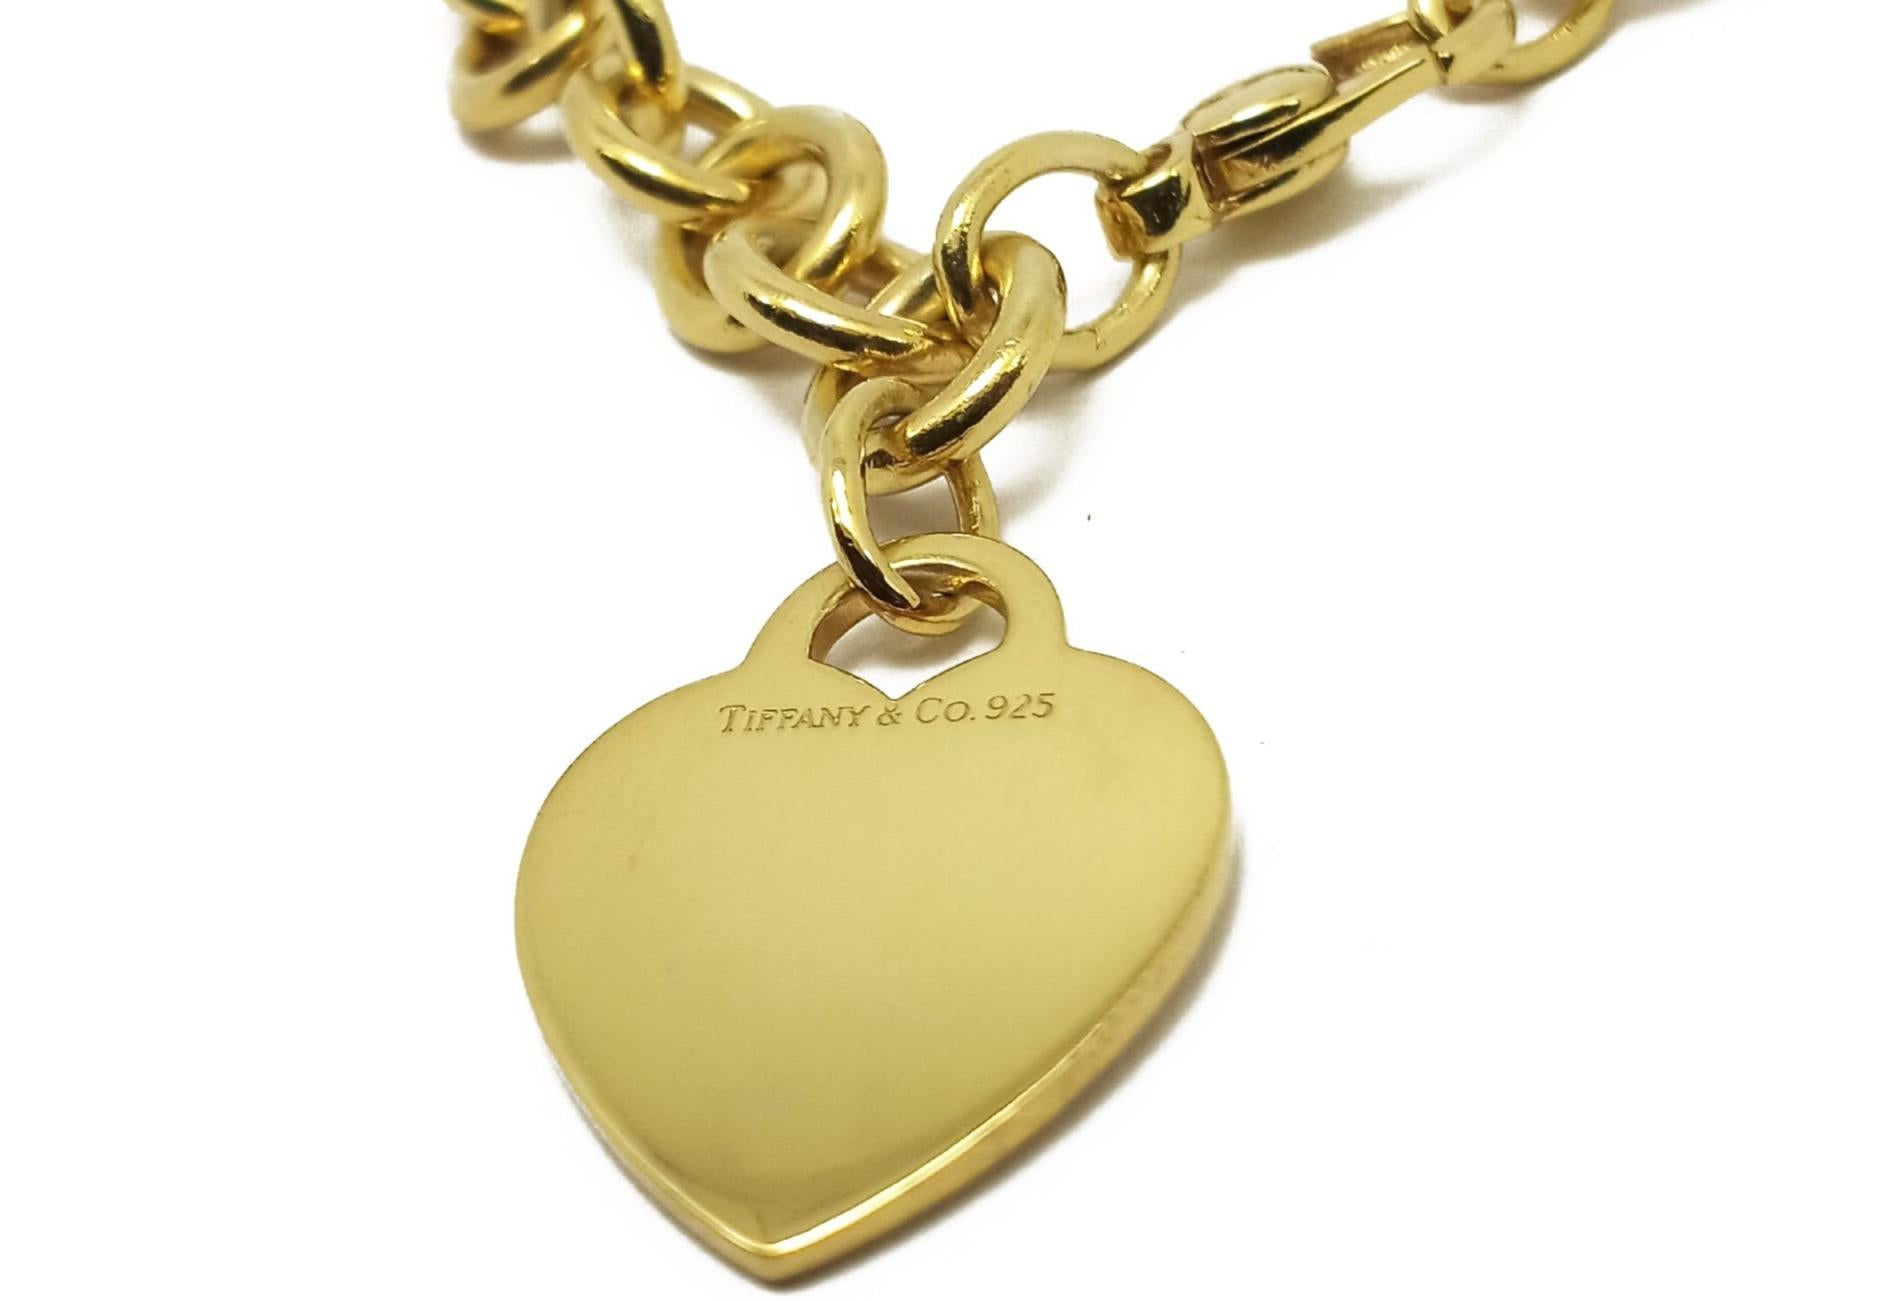 (Item Description)
Brand - Tiffany &Co.
Gender - Unisex
Condition - Pre-Owned 
Style - Heart Charm Bracelet  
Metals - .925 Silver
Weight - 34 Grams
Coating - 24K Yellow Gold
Hall marks - Tiffany &Co. 925
length - 7 1/2 inches
(Tiffany Box & Pouch